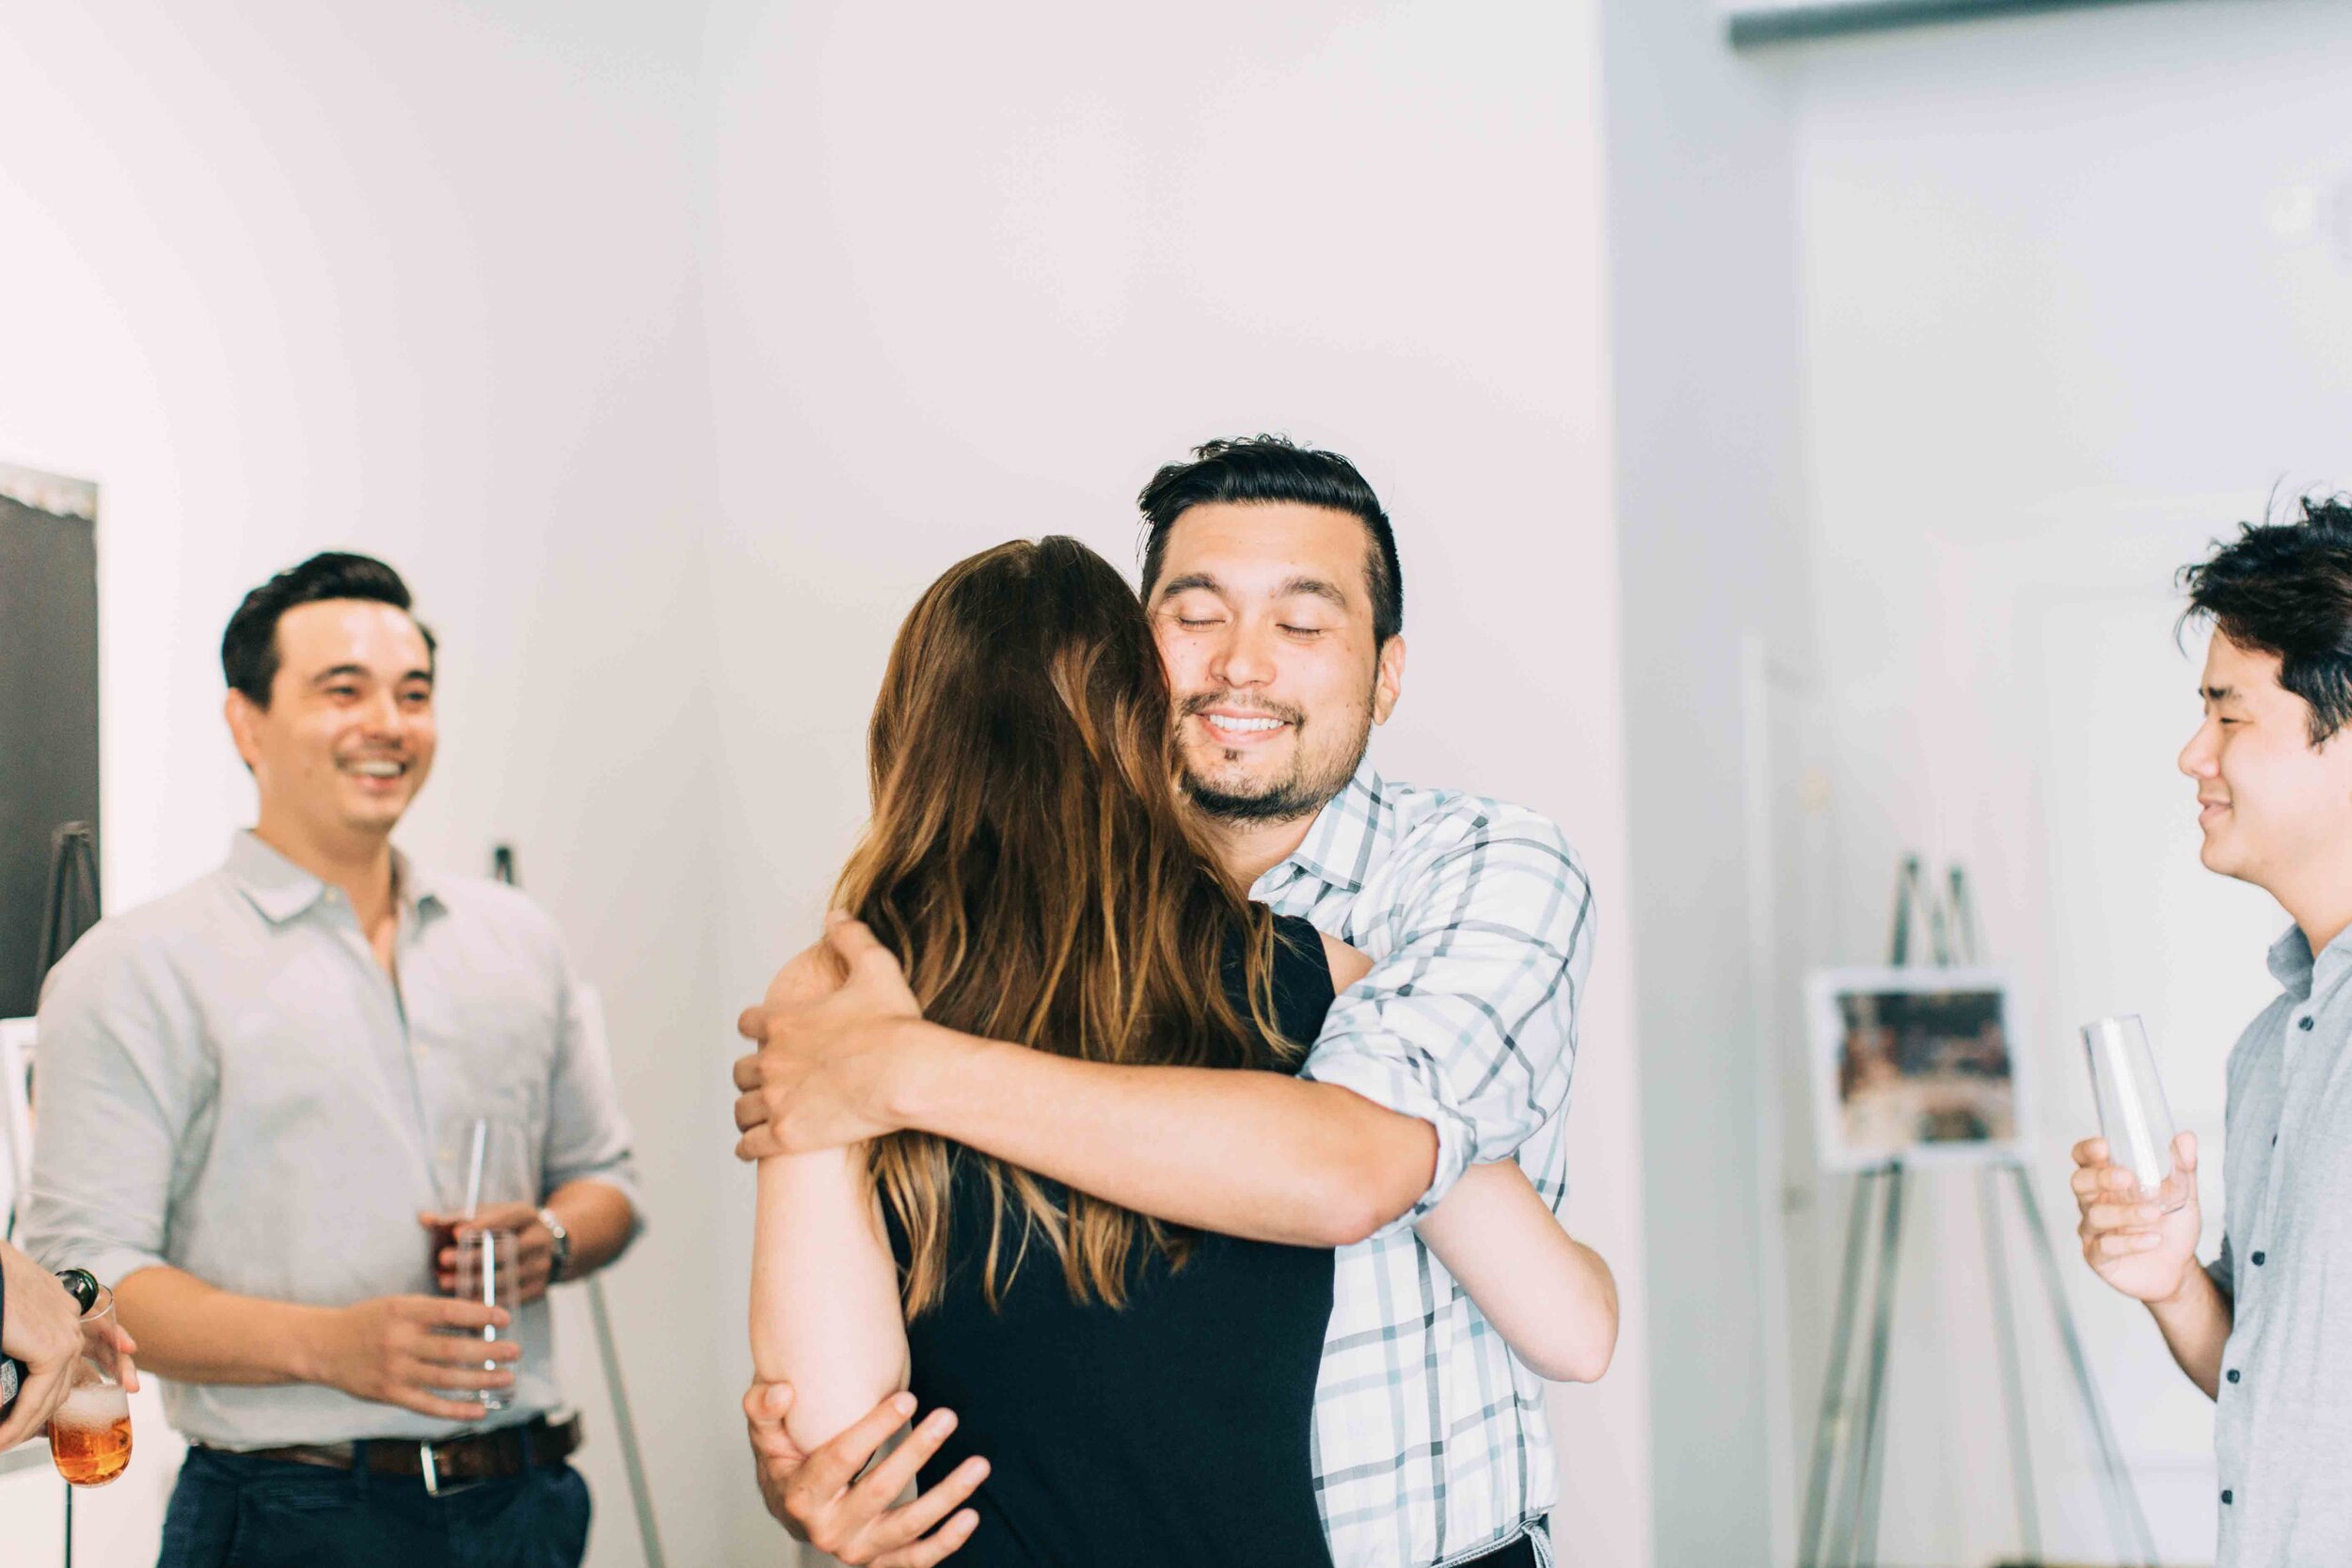 Bride shares hugs with friends at engagement party